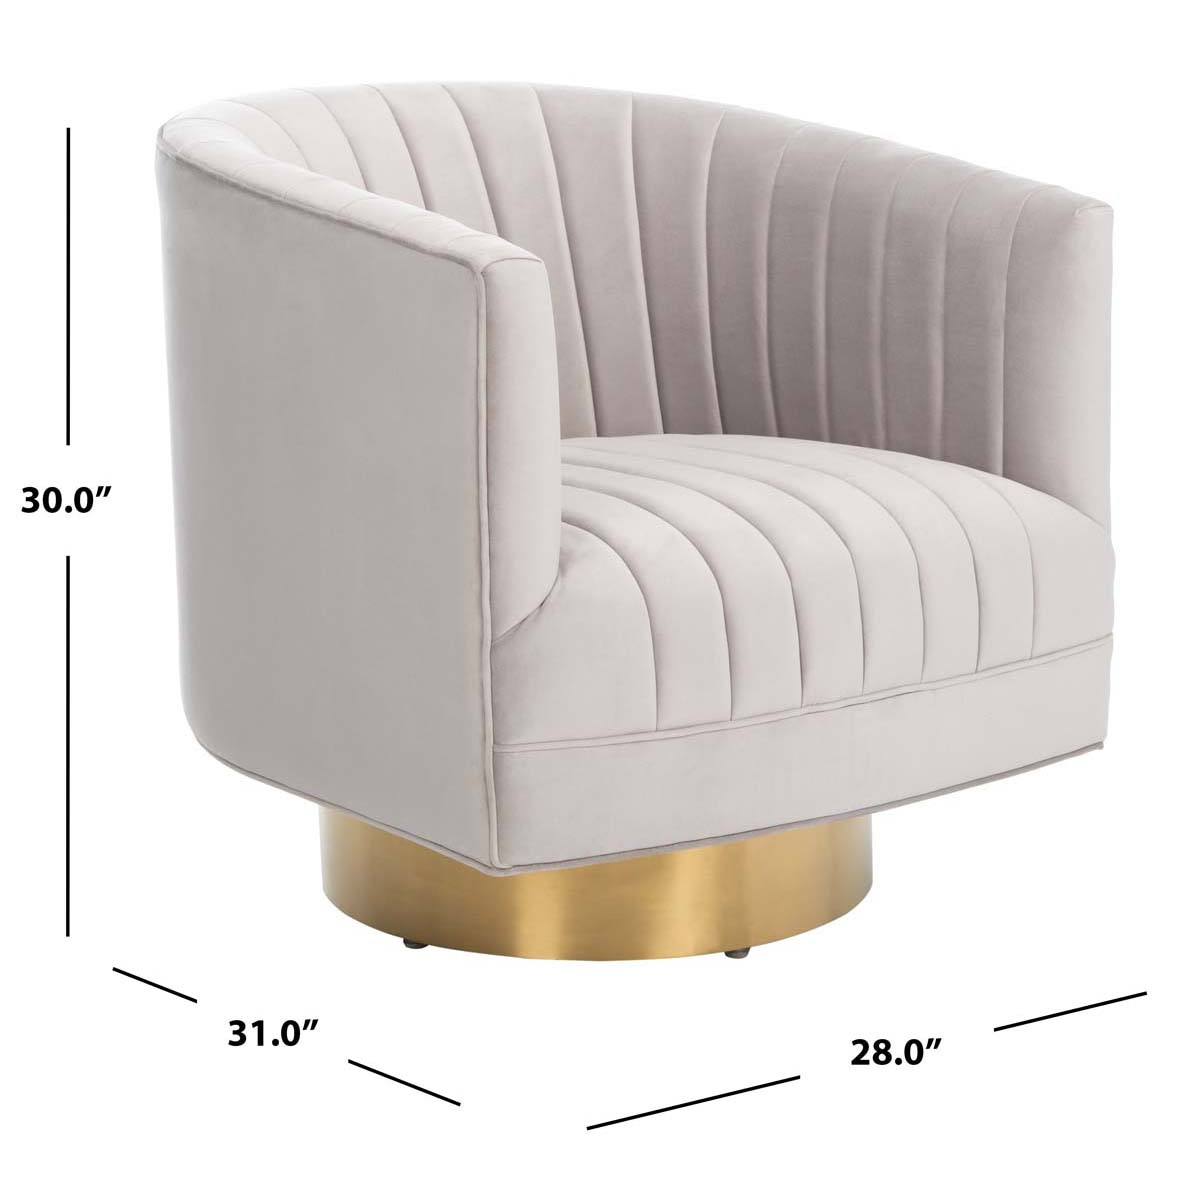 Safavieh Couture Josephine Swivel Barrel Chair - Pale Taupe / Gold